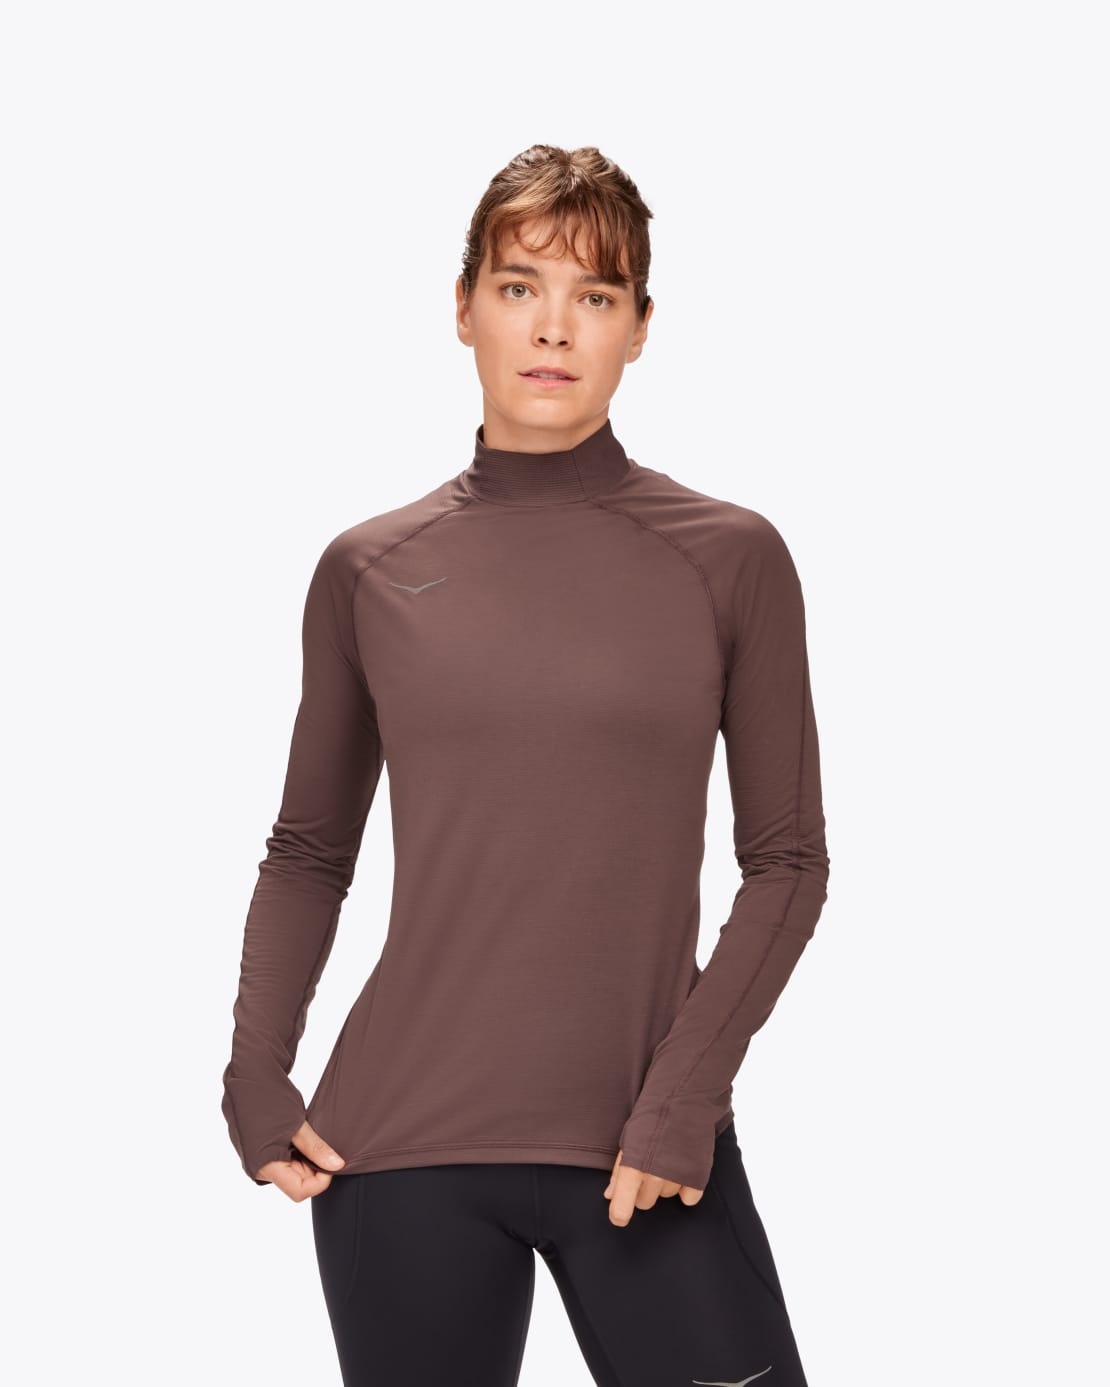 Women's Cold Weather Layer - 1